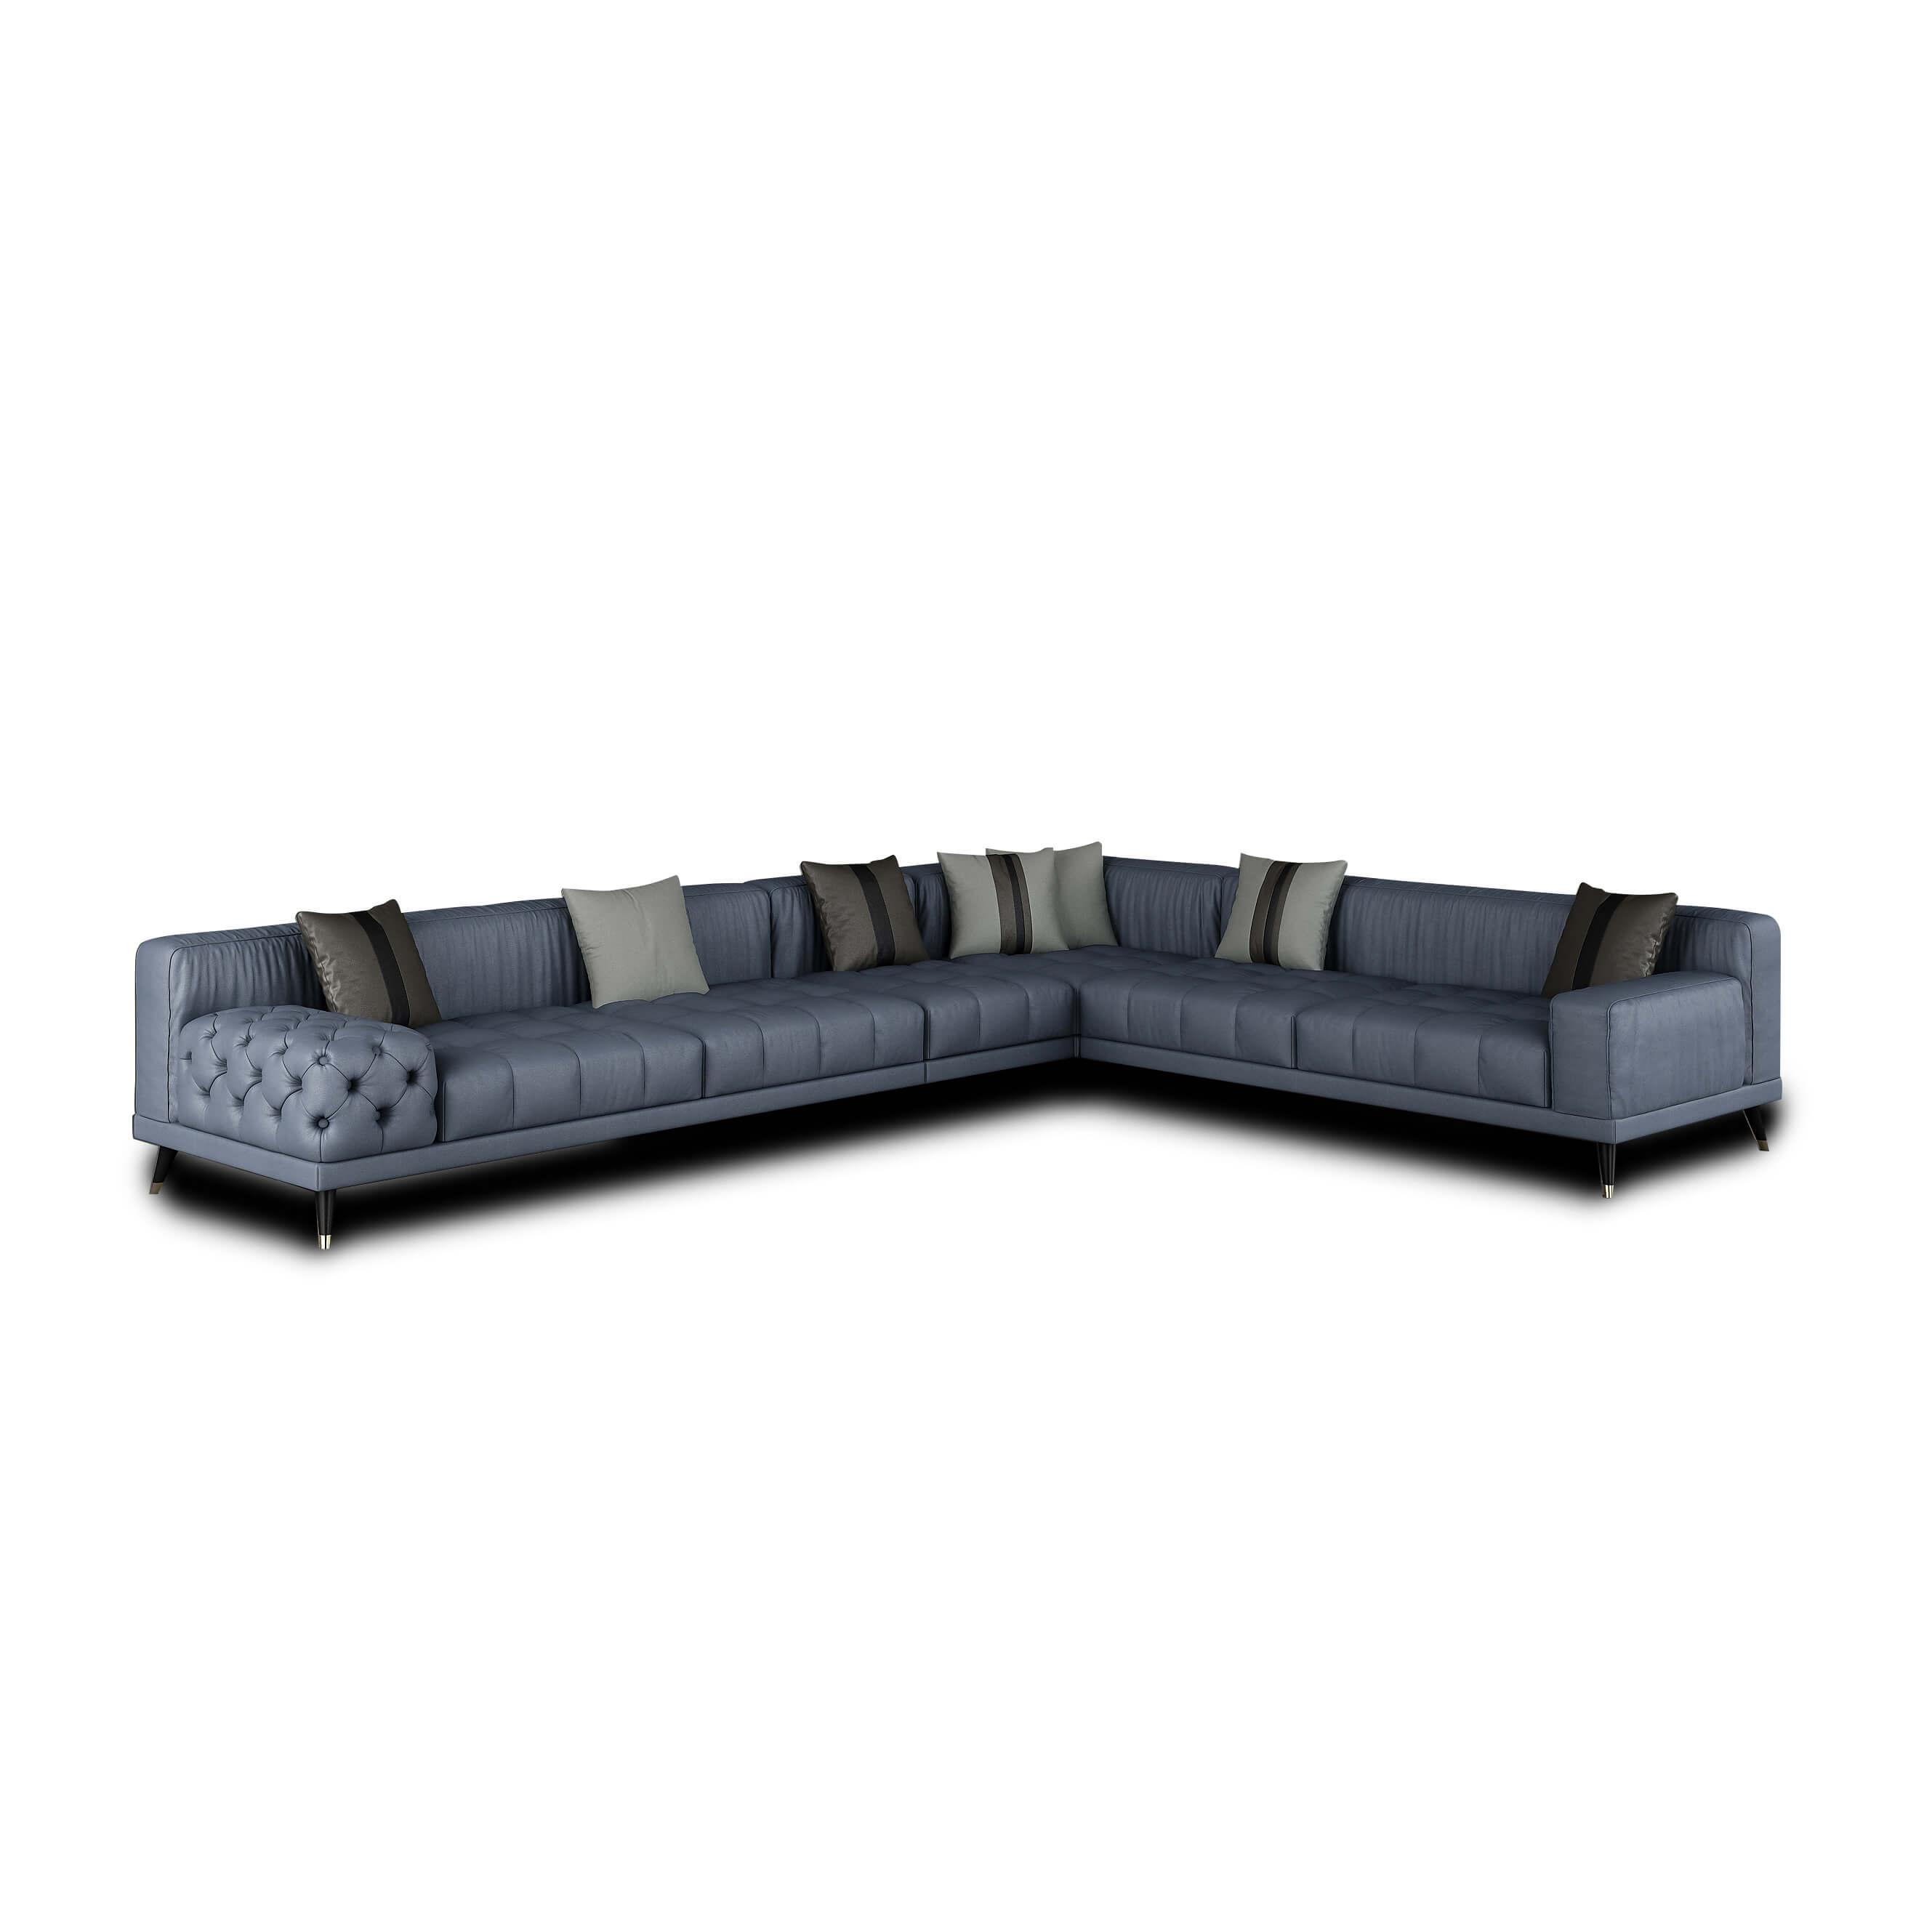 Modern Modular Sectional Sofa Outlander EF-88888-4PC in Gray Leather